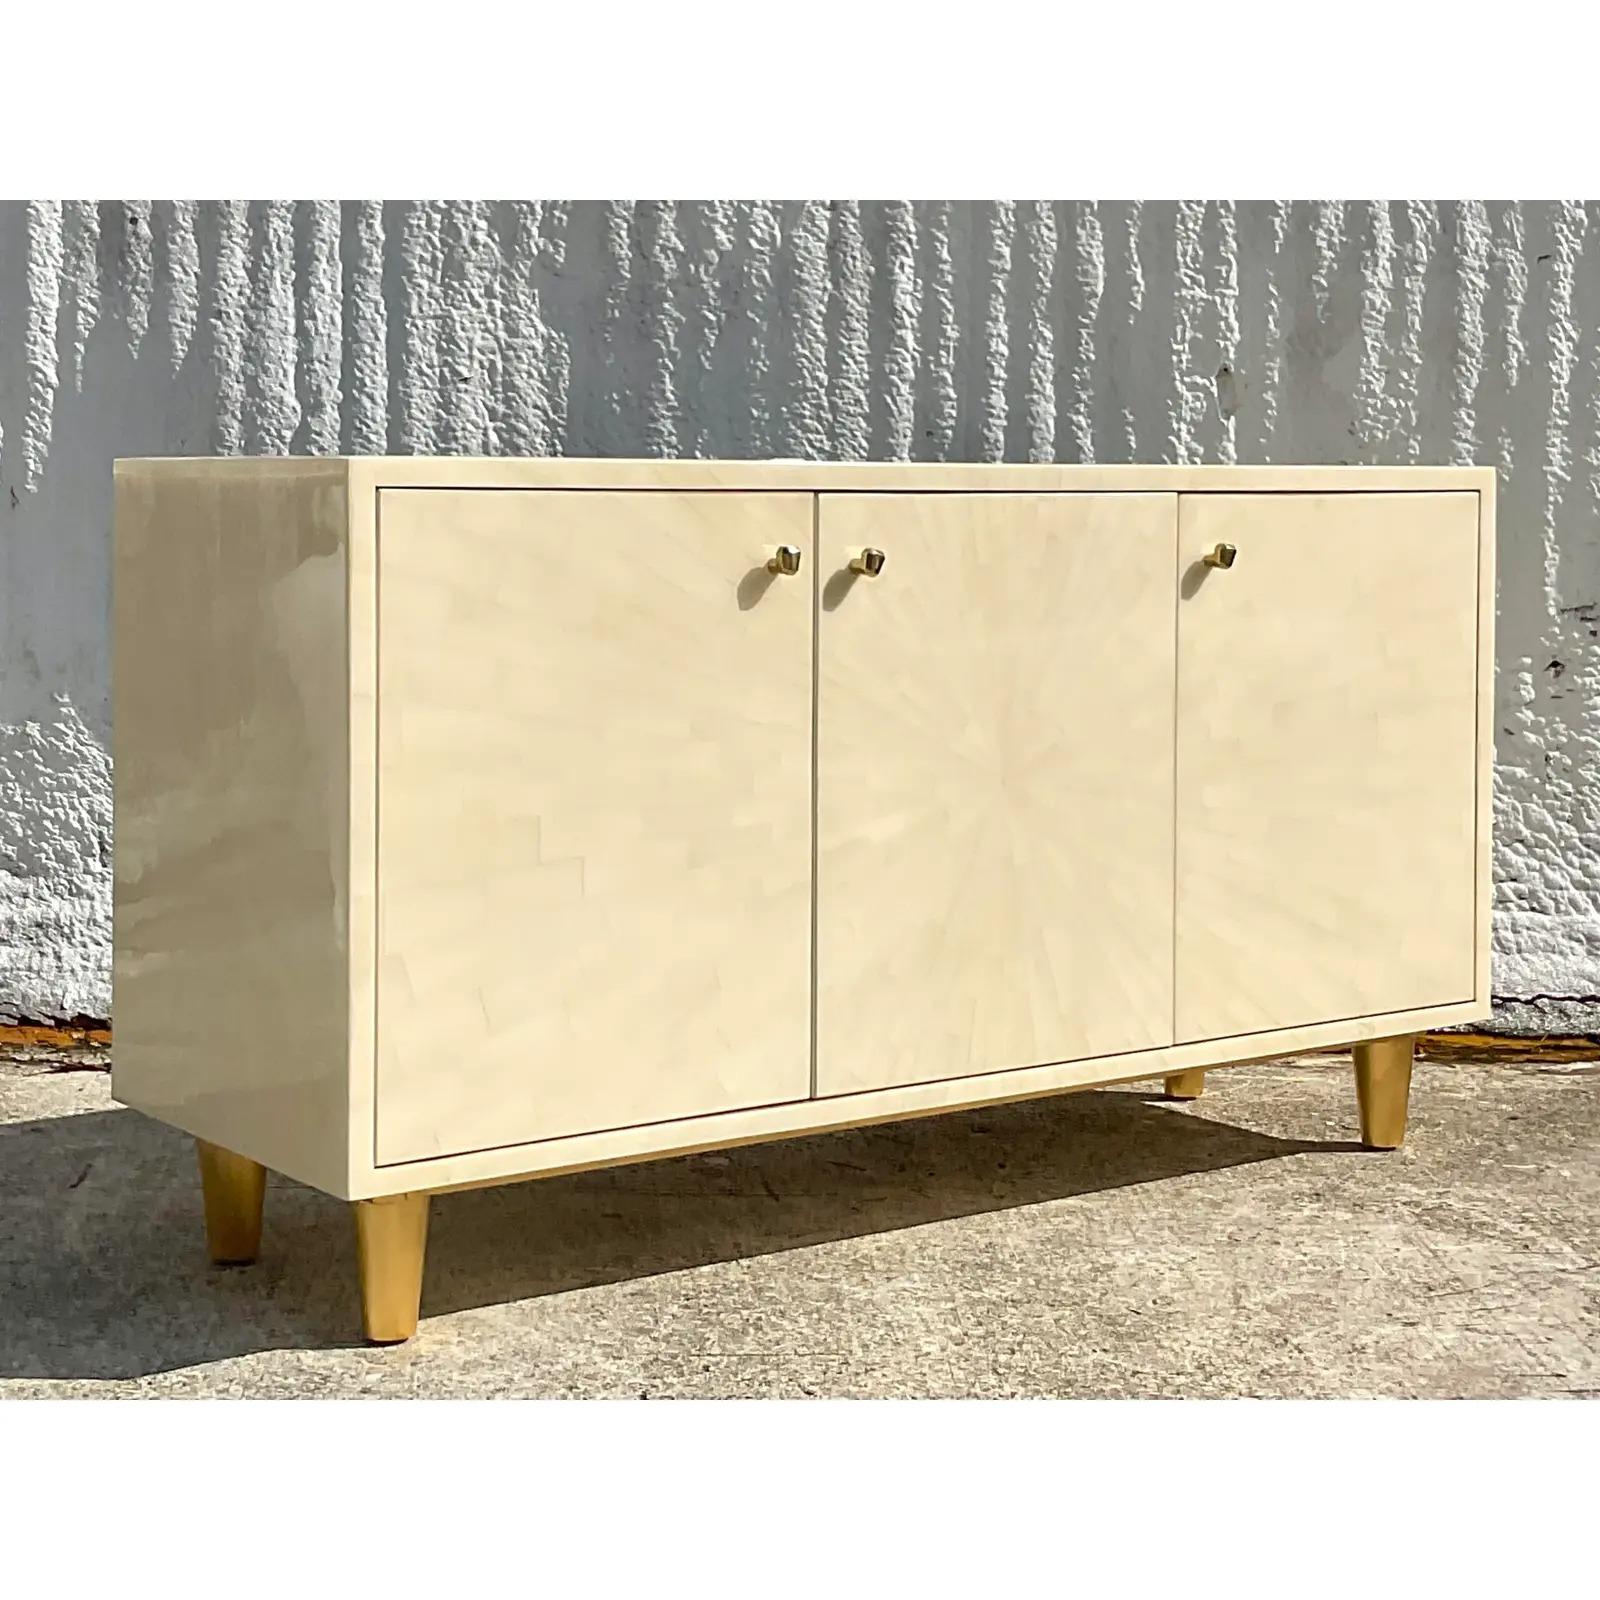 A fantastic vintage contemporary Faux horn credenza. Made by the iconic Made Goods group. A chic pale ivory gradient in a starburst design. Acquired from a Palm Beach estate.